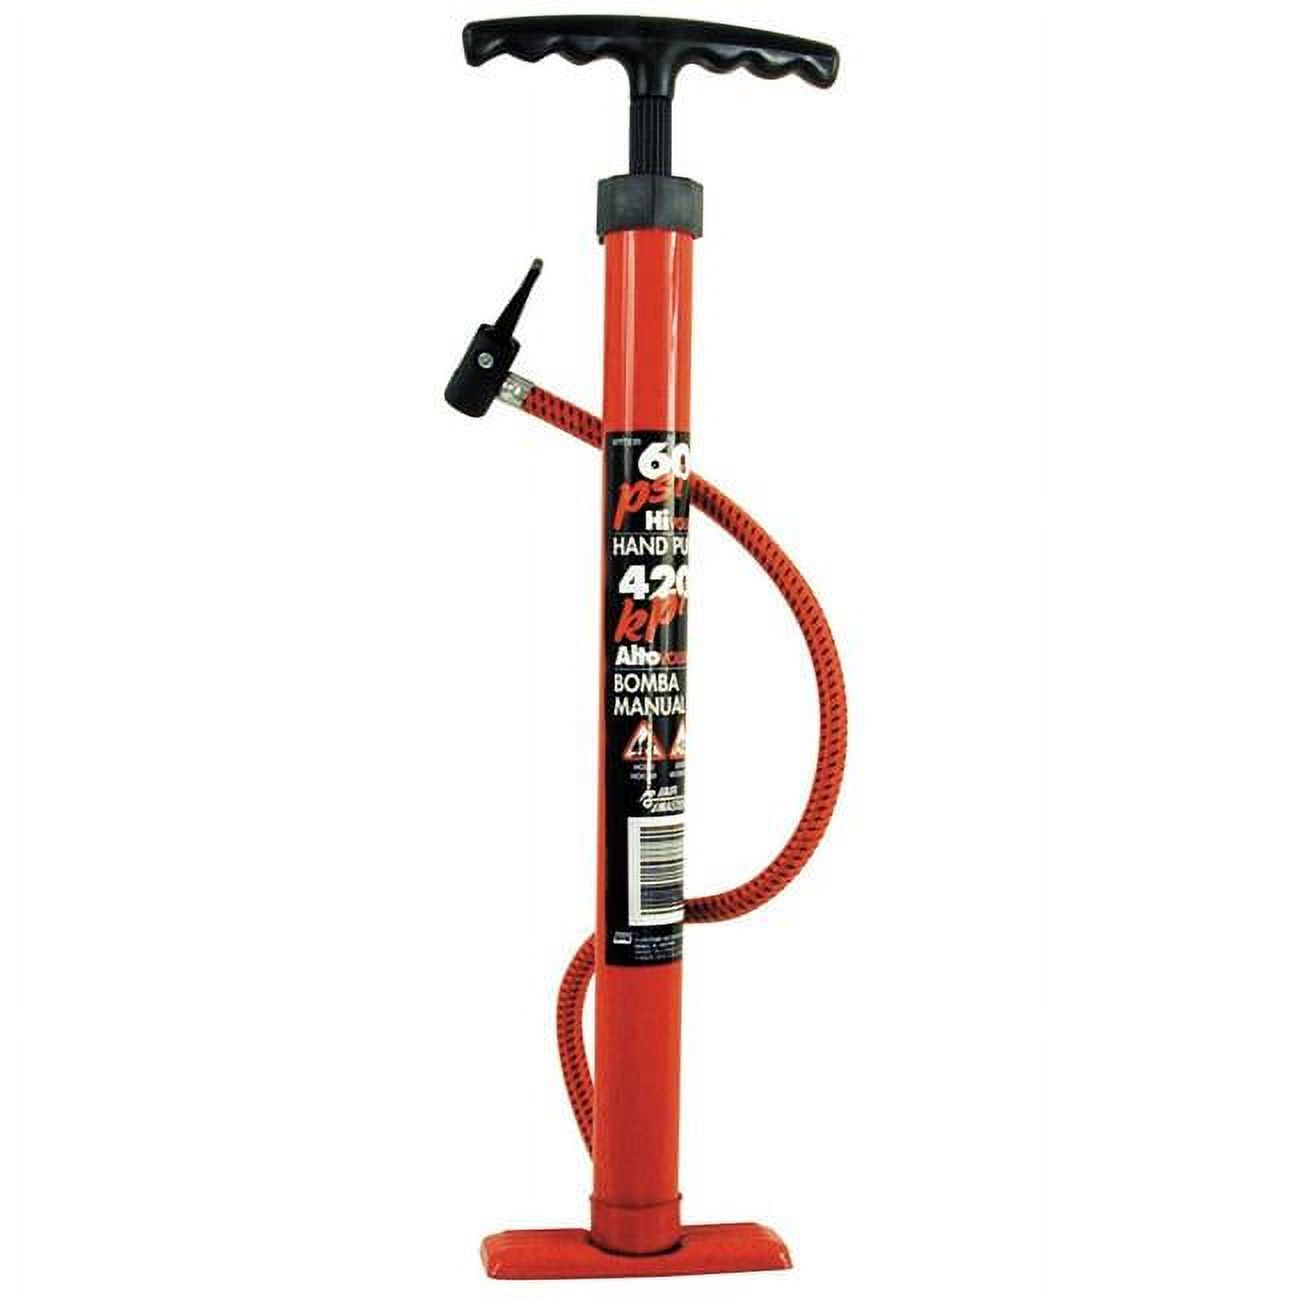 Custom Accessories 57772 18" Heavy Duty Tire Pump Assorted Colors - image 1 of 2